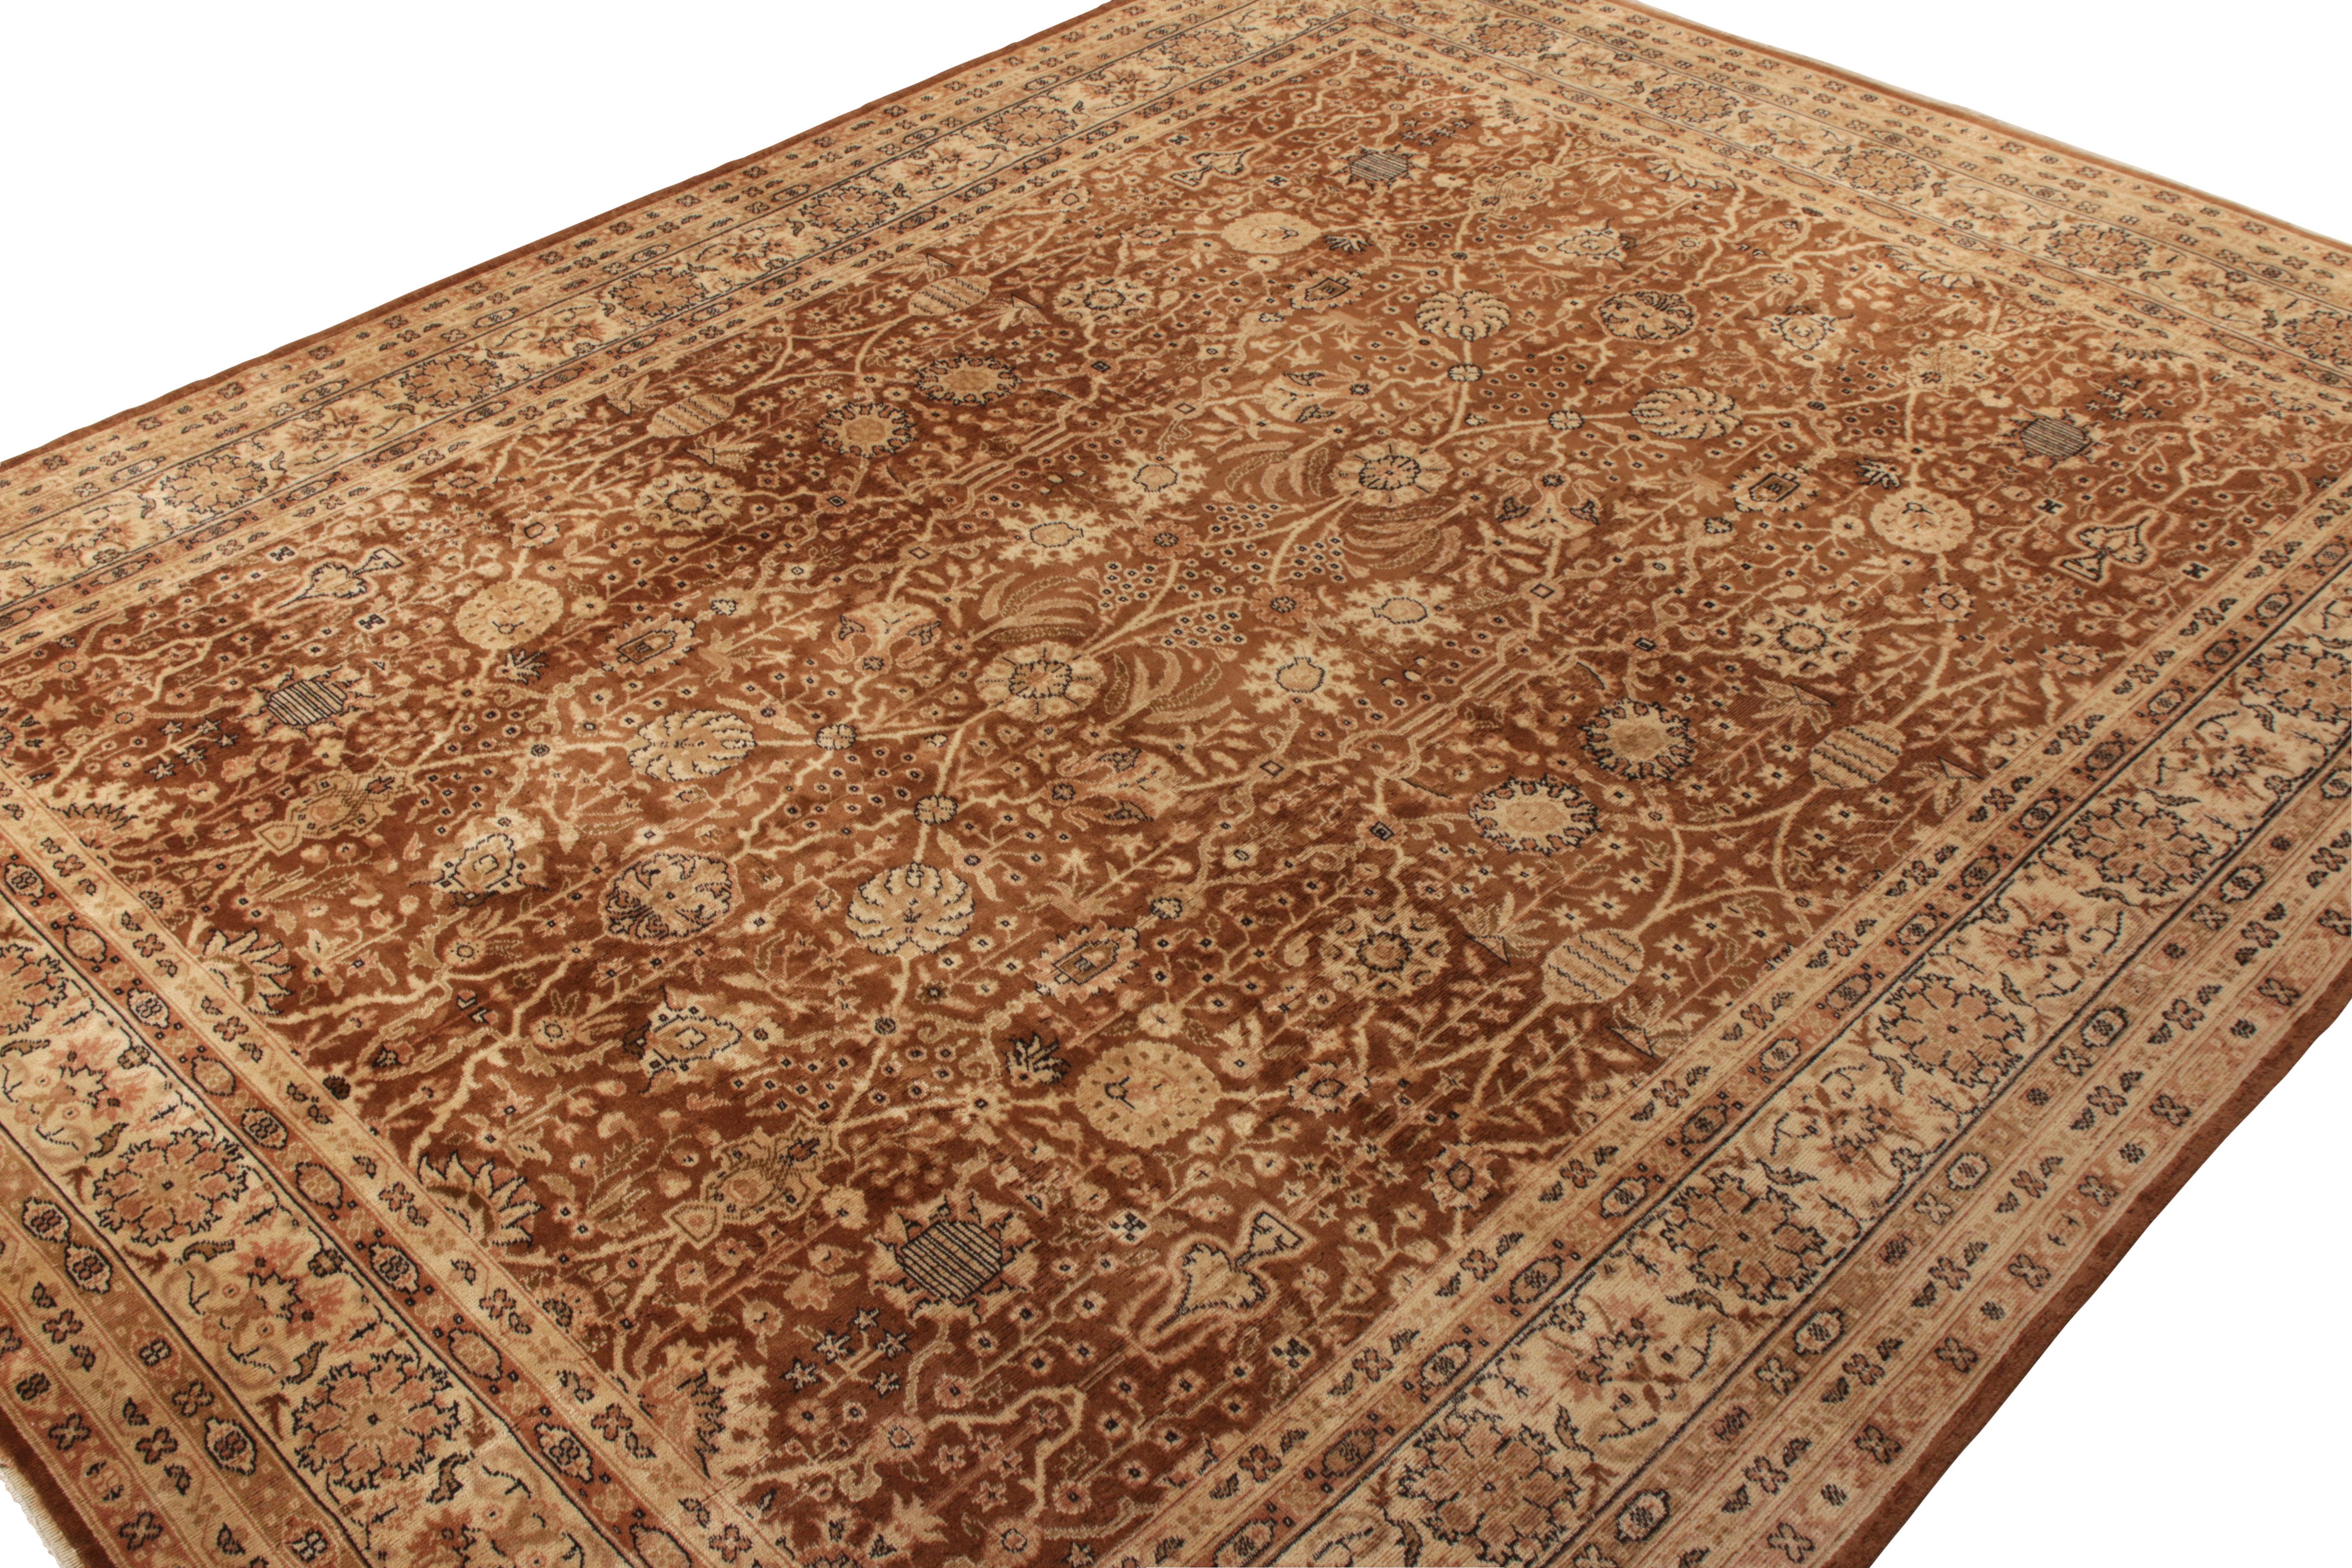 Turkish Hand-Knotted Antique Rug in All over Brown, Beige, Floral Pattern by Rug & Kilim For Sale